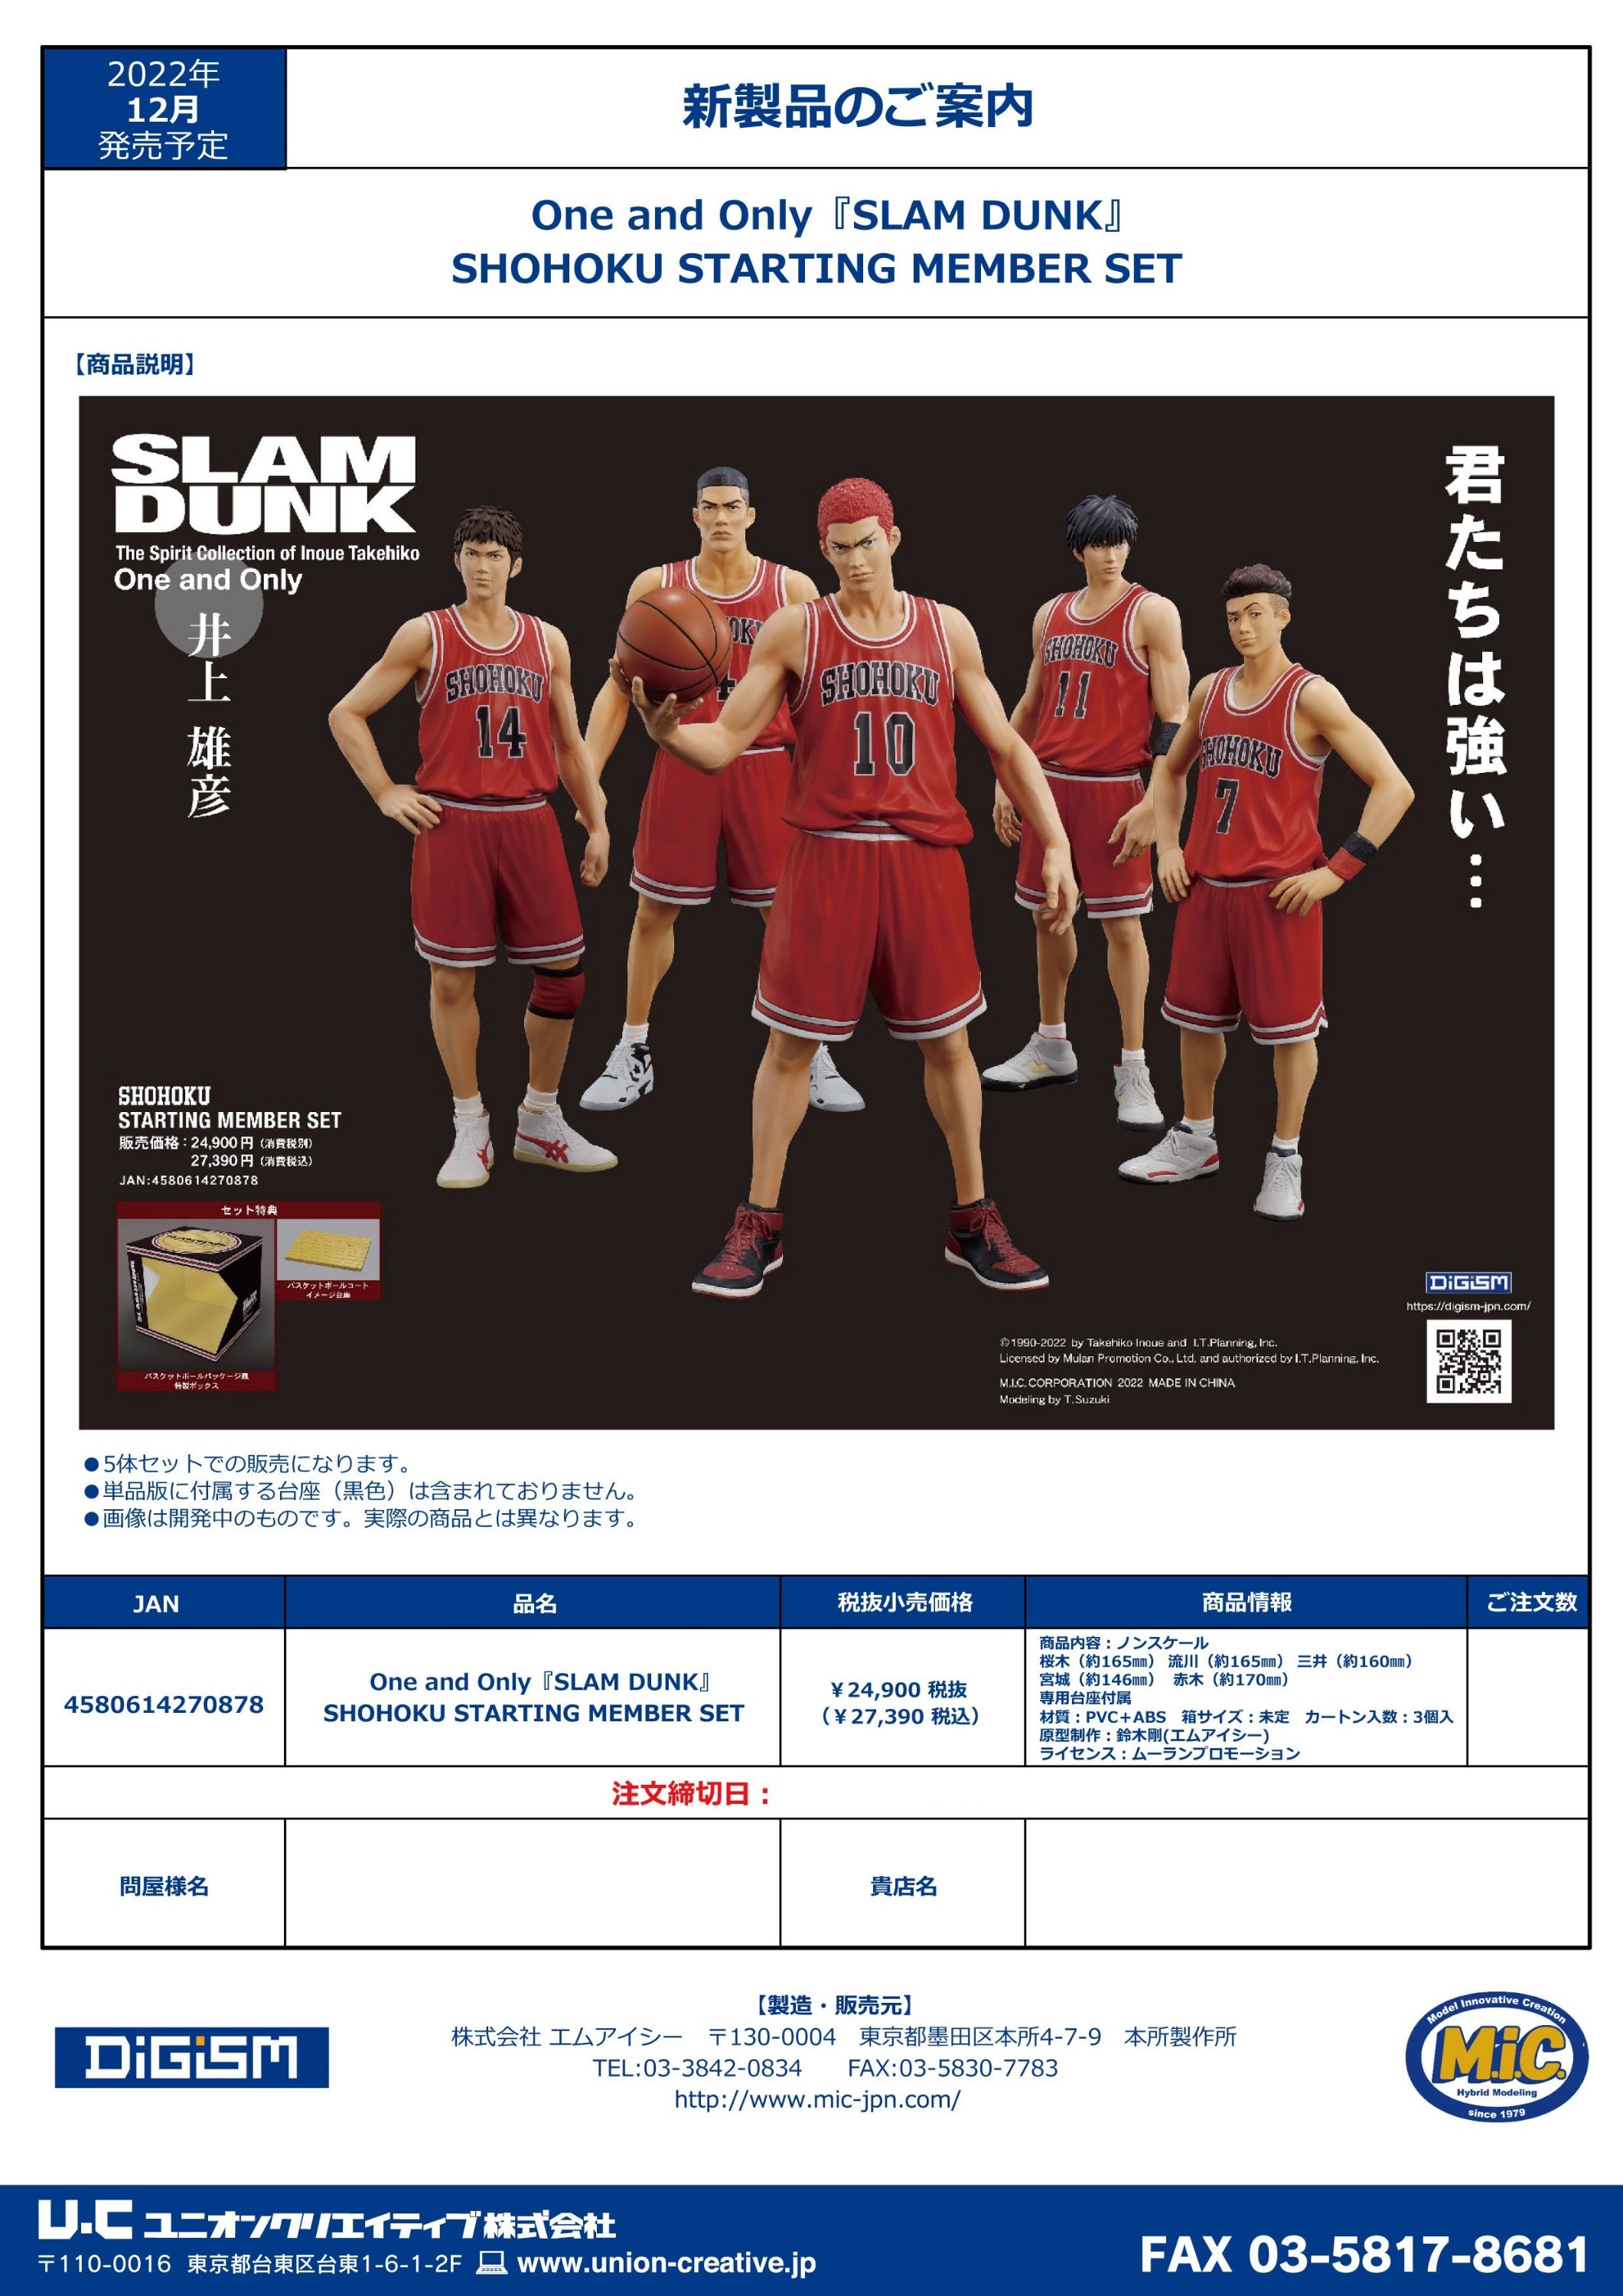 PRE-ORDER M.I.C. One and Only “SLAM DUNK” SHOHOKU STARTING MEMBER